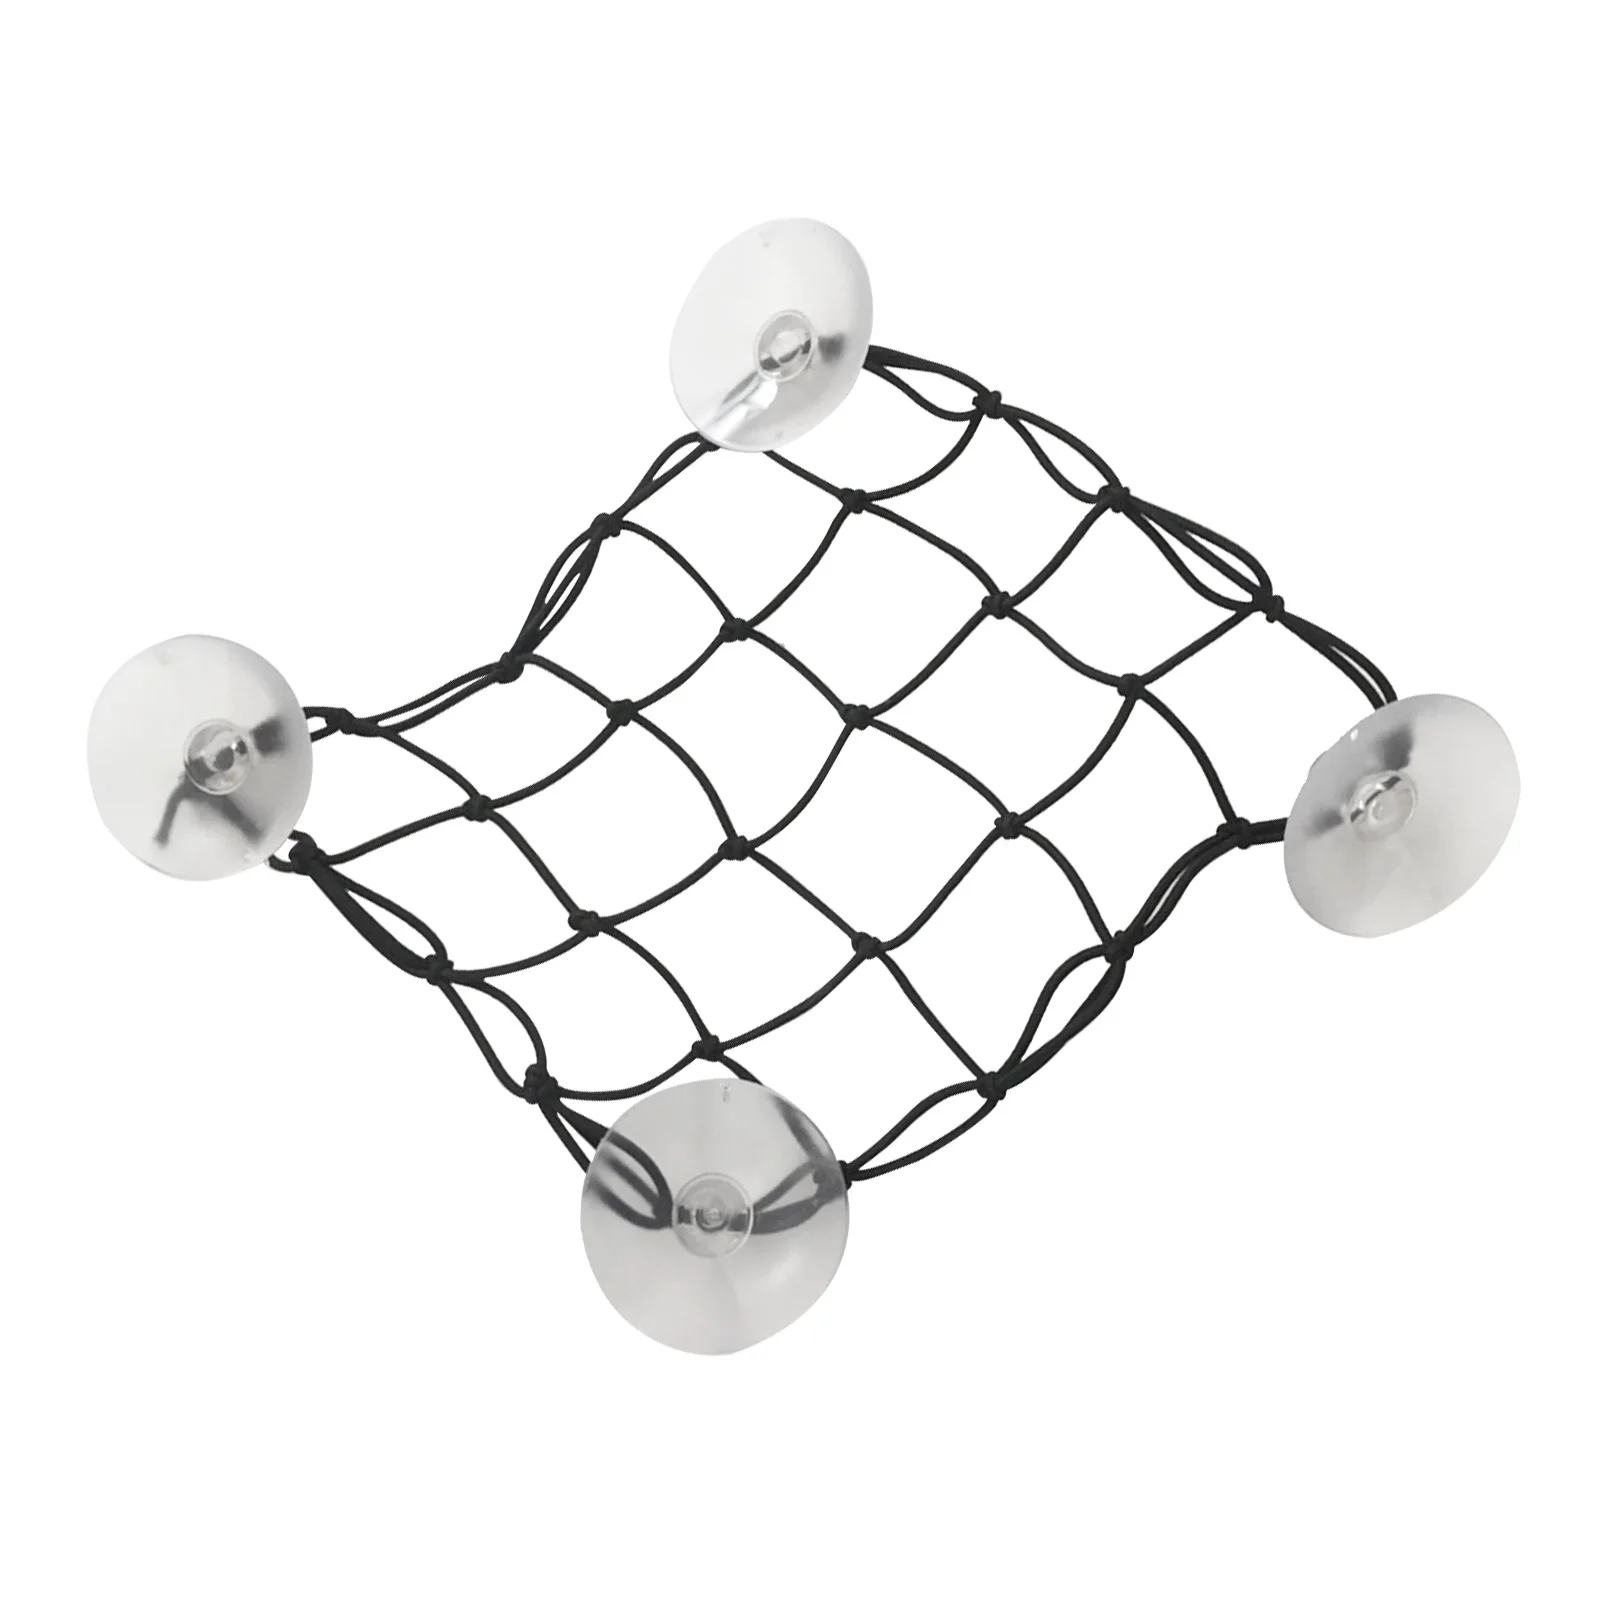 Lightweight Surfboard Suction Cup Net,Mesh Deck Bag Nylon Rope Surfboard Deck Storage Bag with 4 Suction Cups for Paddleboard Deck Pouch 